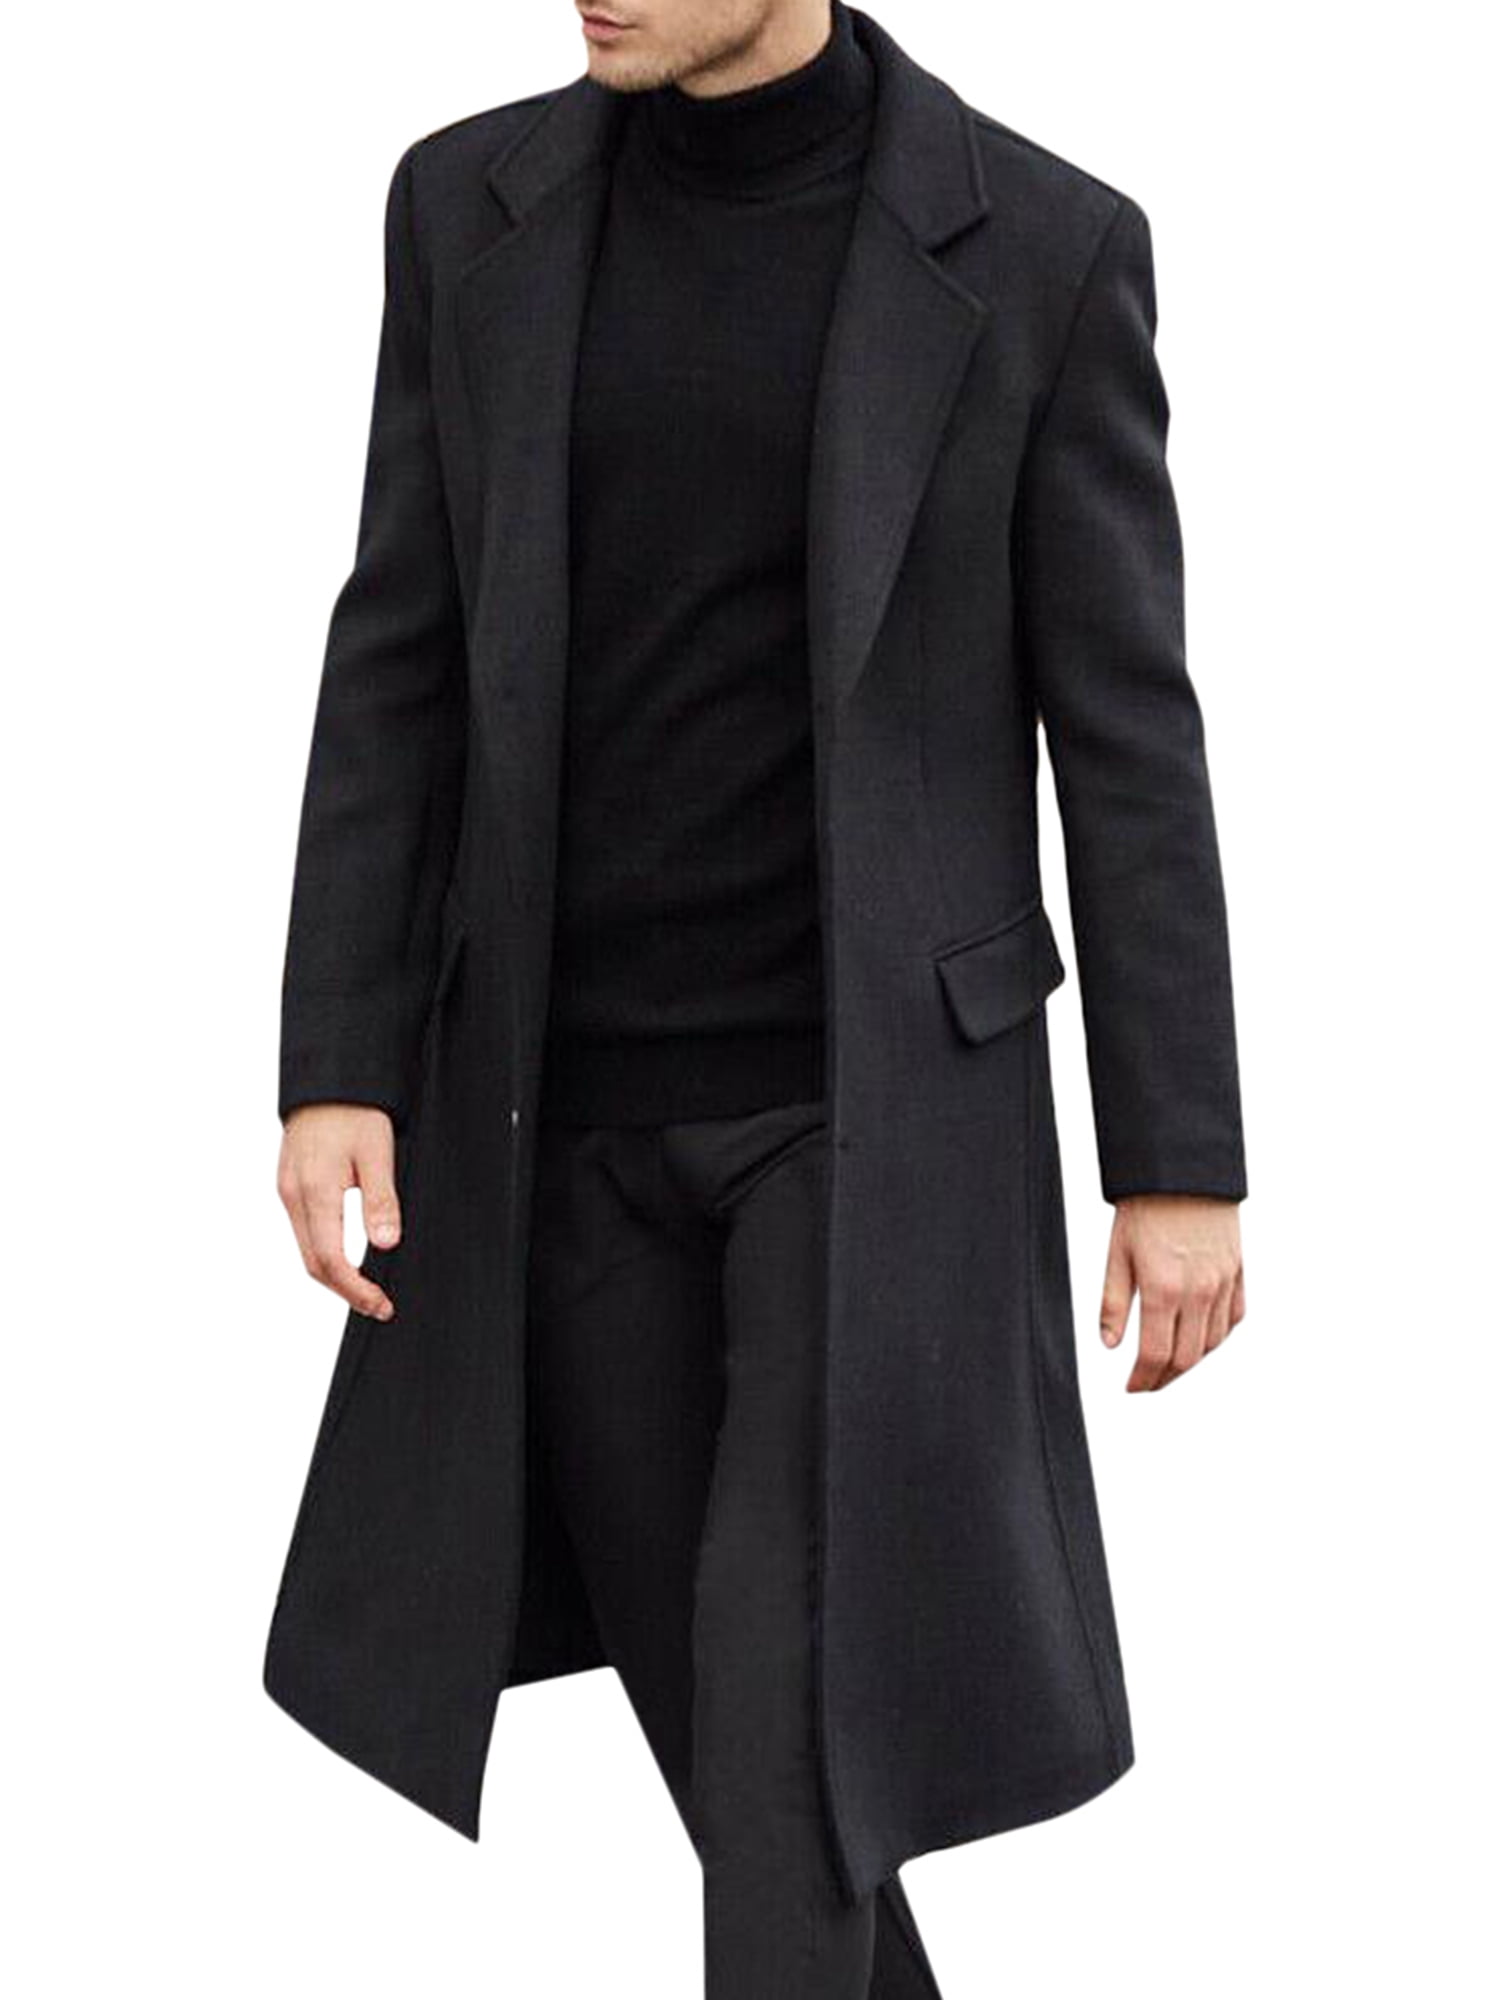 Mens Winter Lapel Work Trench Coat Outerwear Long Sleeve Office ...